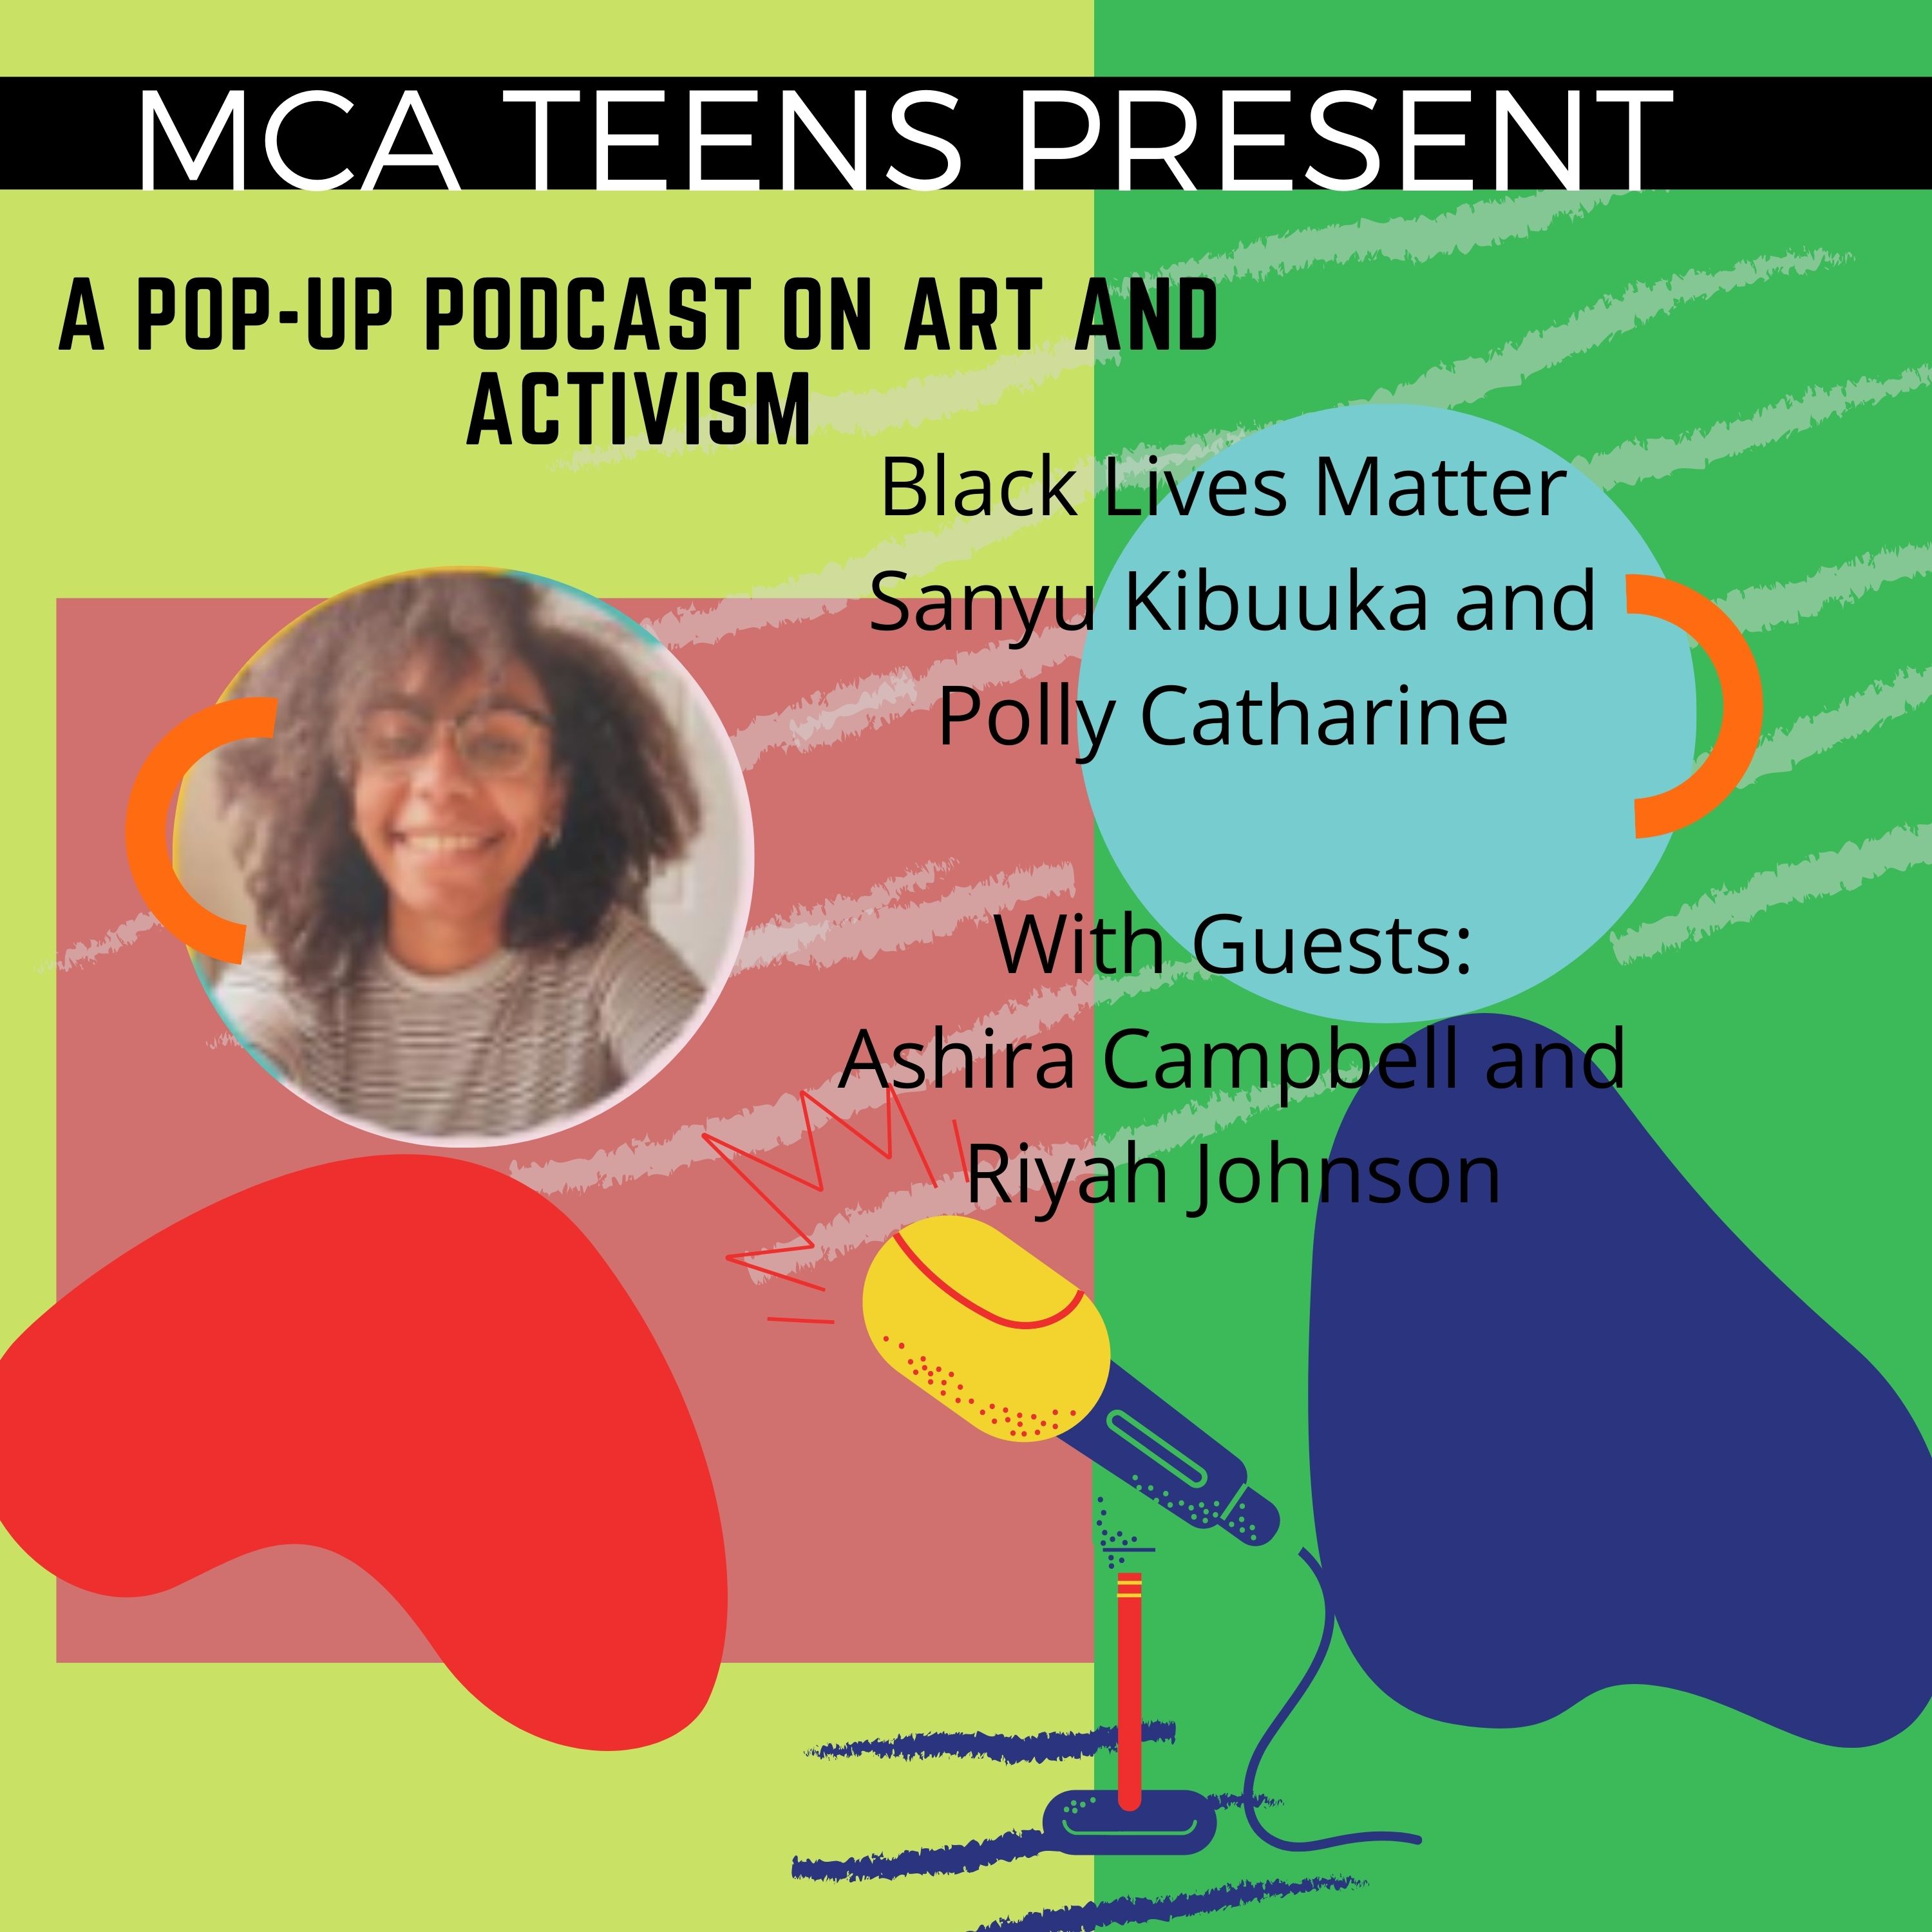 MCA Teens present a pop-up podcast on art and activism. "Black Lives Matter," Sanyu Kibuuka and Polly Catharine with guests Ashira Campbell and Riyah Johnson.